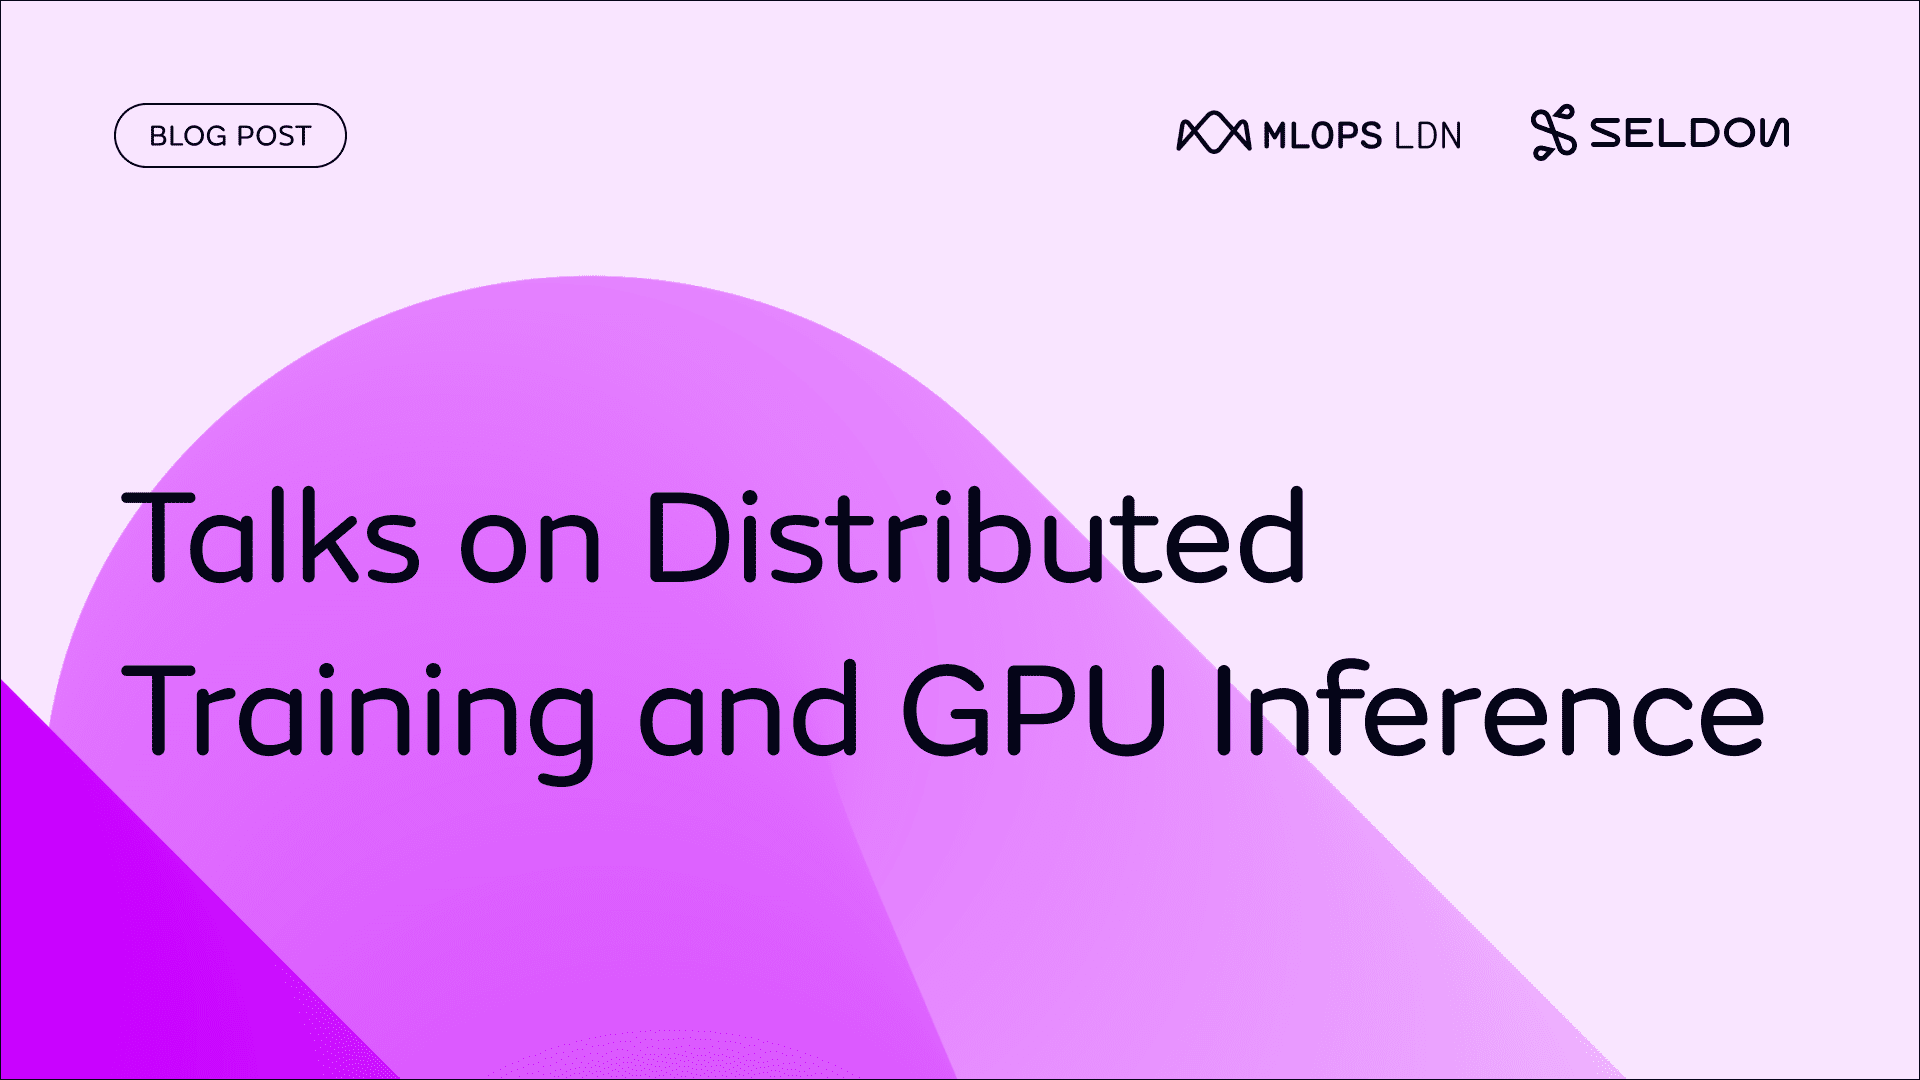 MLOps London January: Talks on Distributed Training and GPU Inference